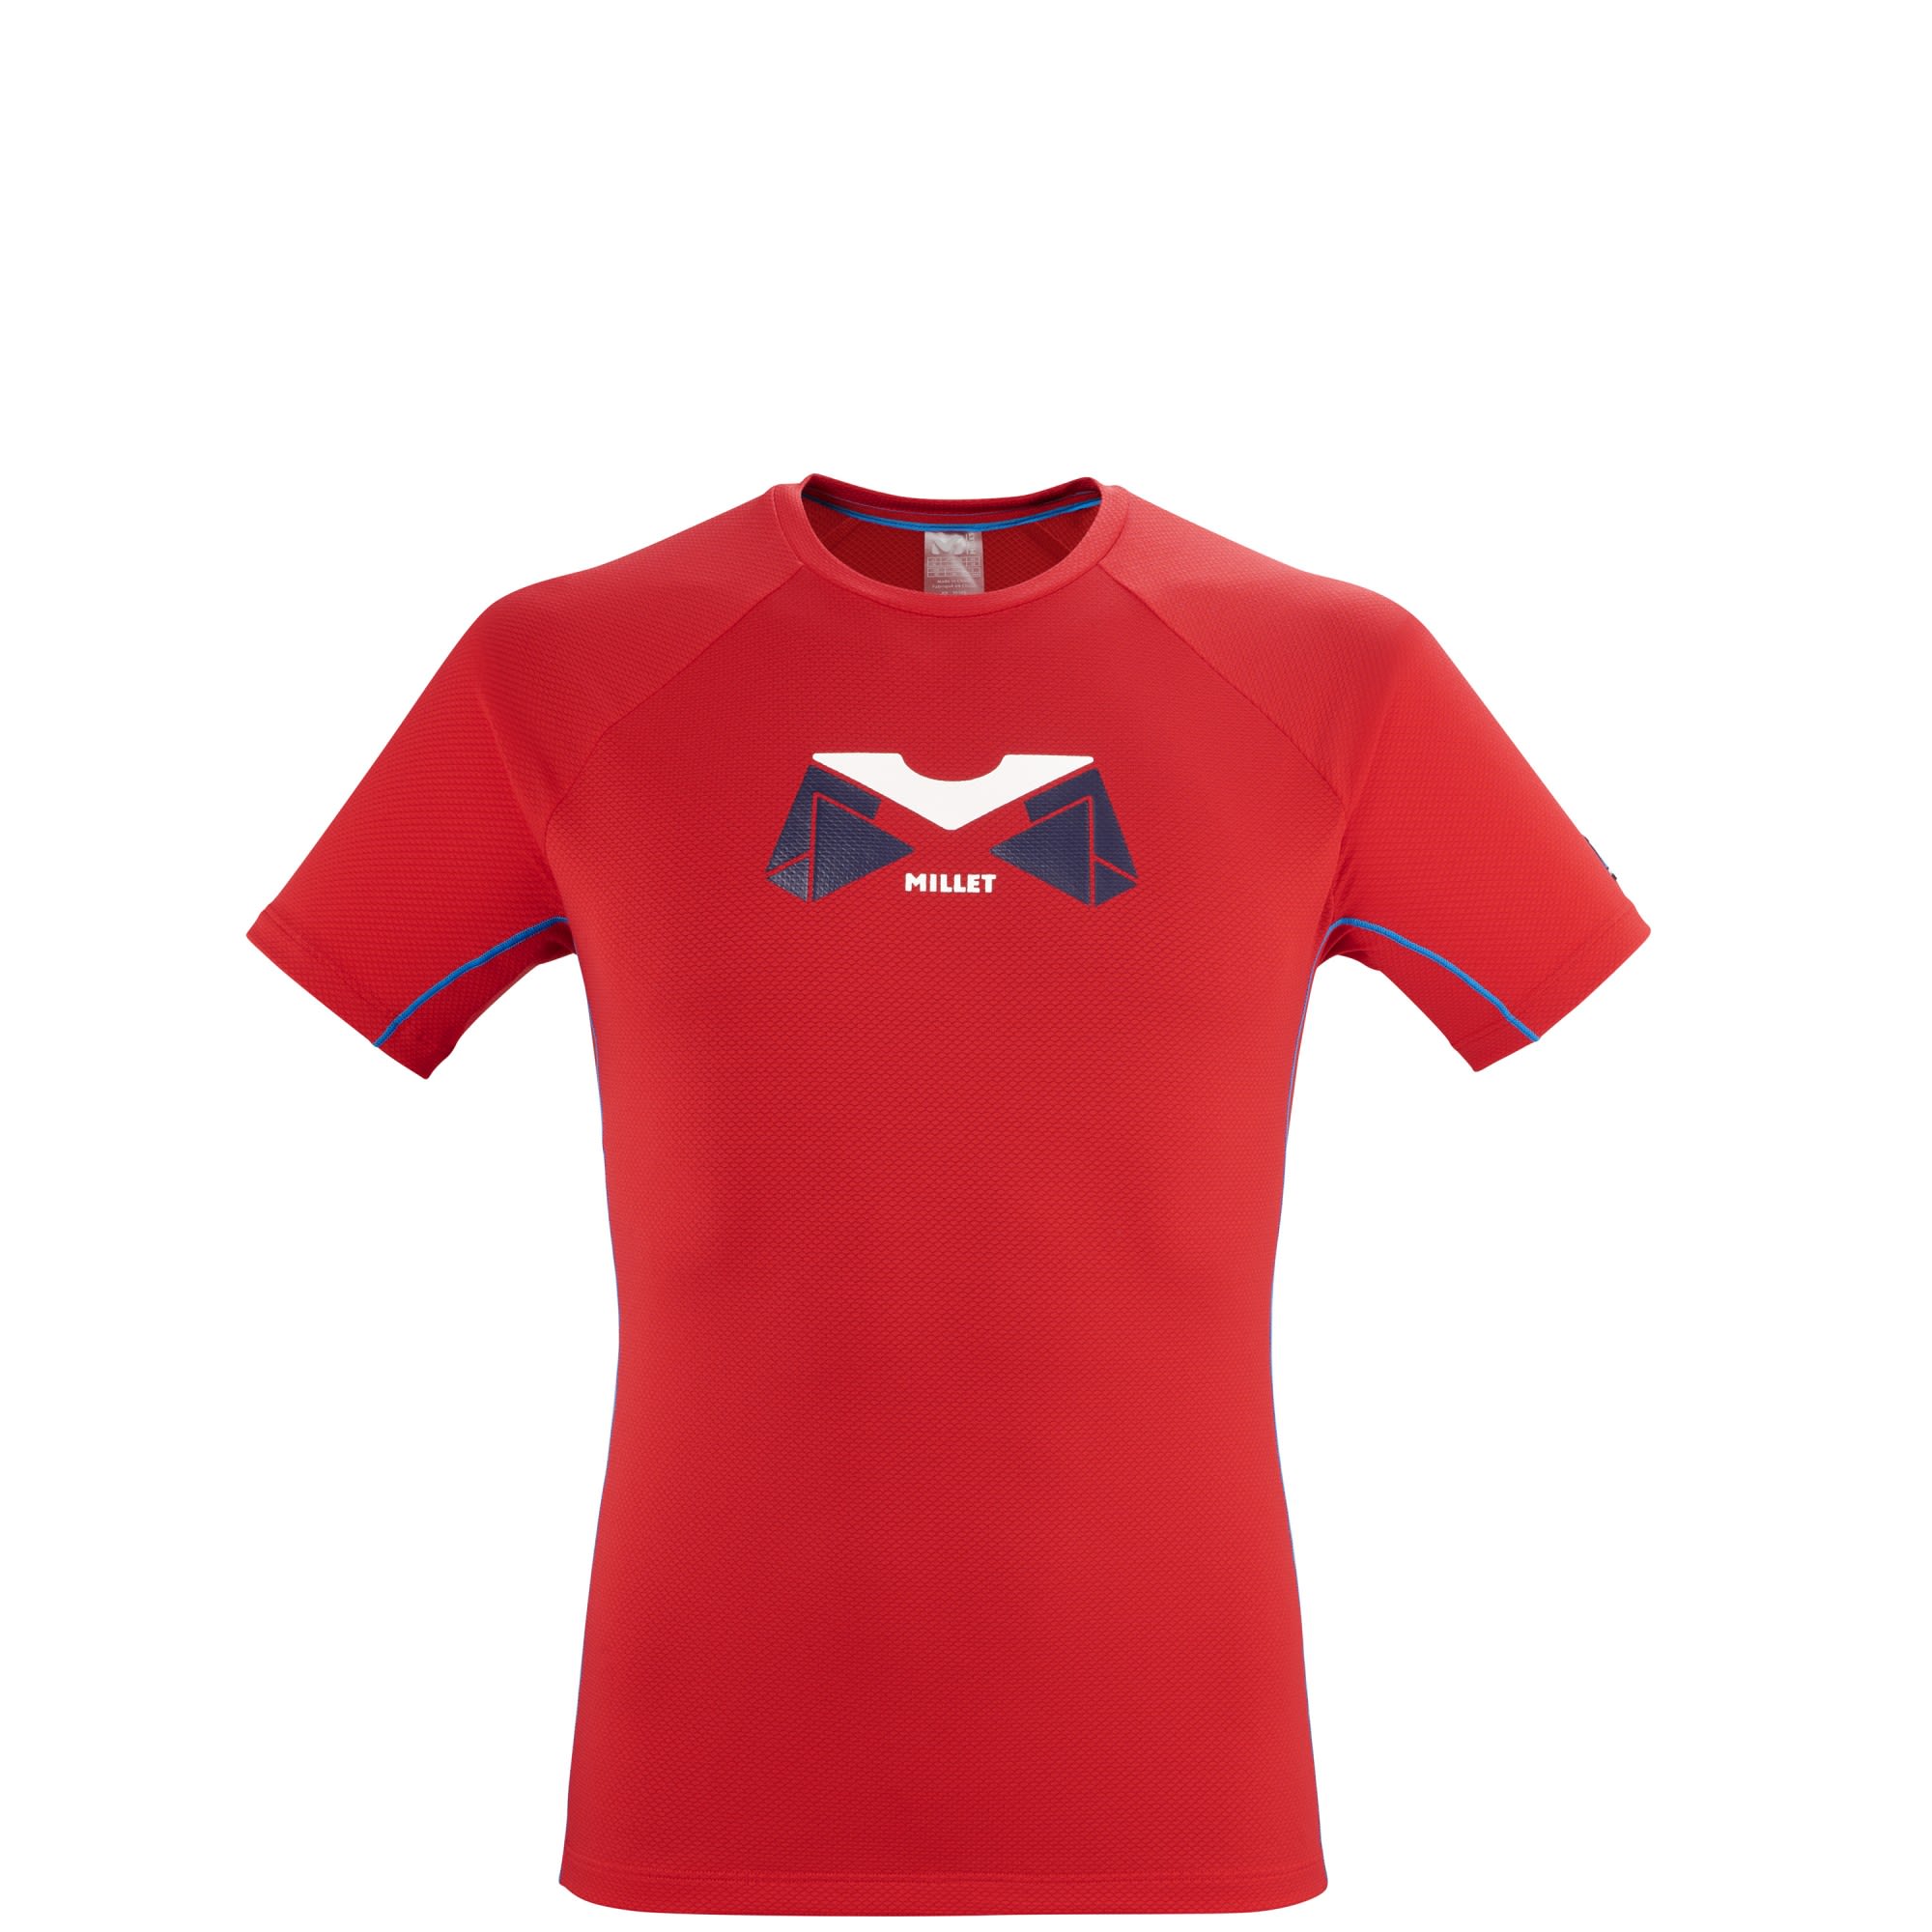 Millet Trilogy Delta ORI TS Short-Sleeve Rot- Male Polartec(R) T-Shirts- Grsse S - Farbe Red - Rouge